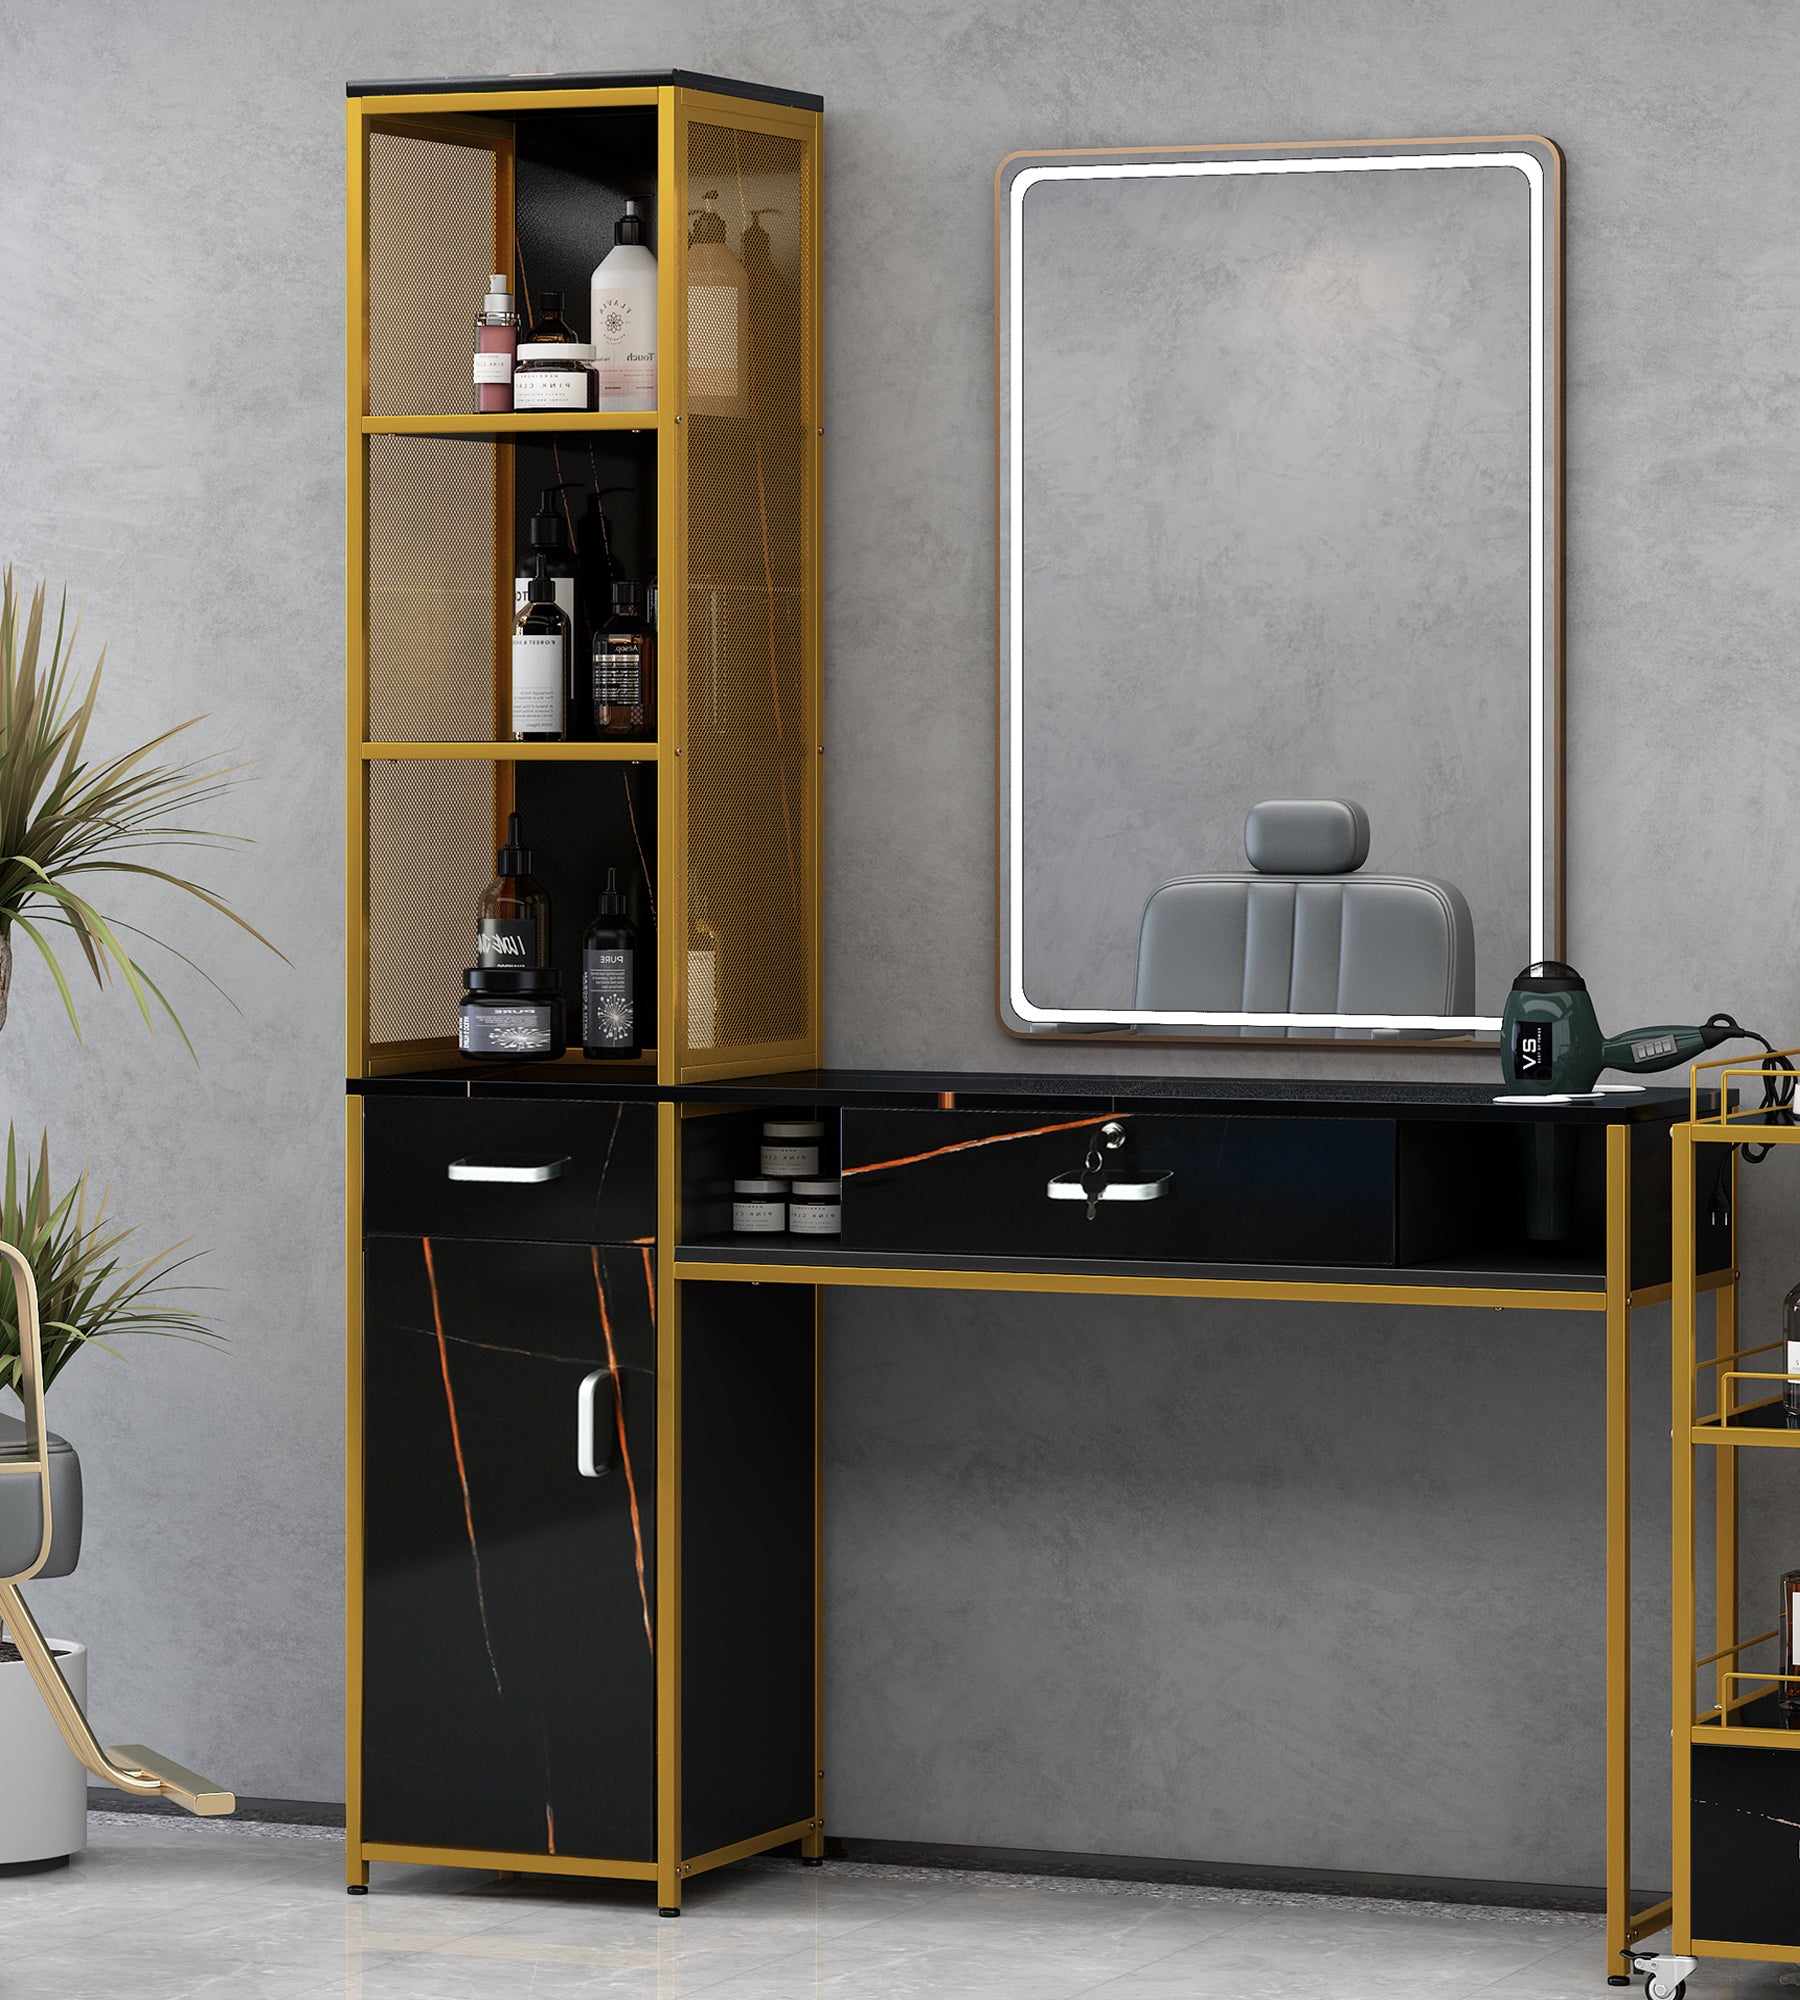 🆓🚛 Barber Salon Station for Hair Stylist, Beauty Salon Station With Lockable Drawer, Left Shelf and Storage Cabinet, Beauty Spa Equipment, Mirror Not Included, Black & Yellow